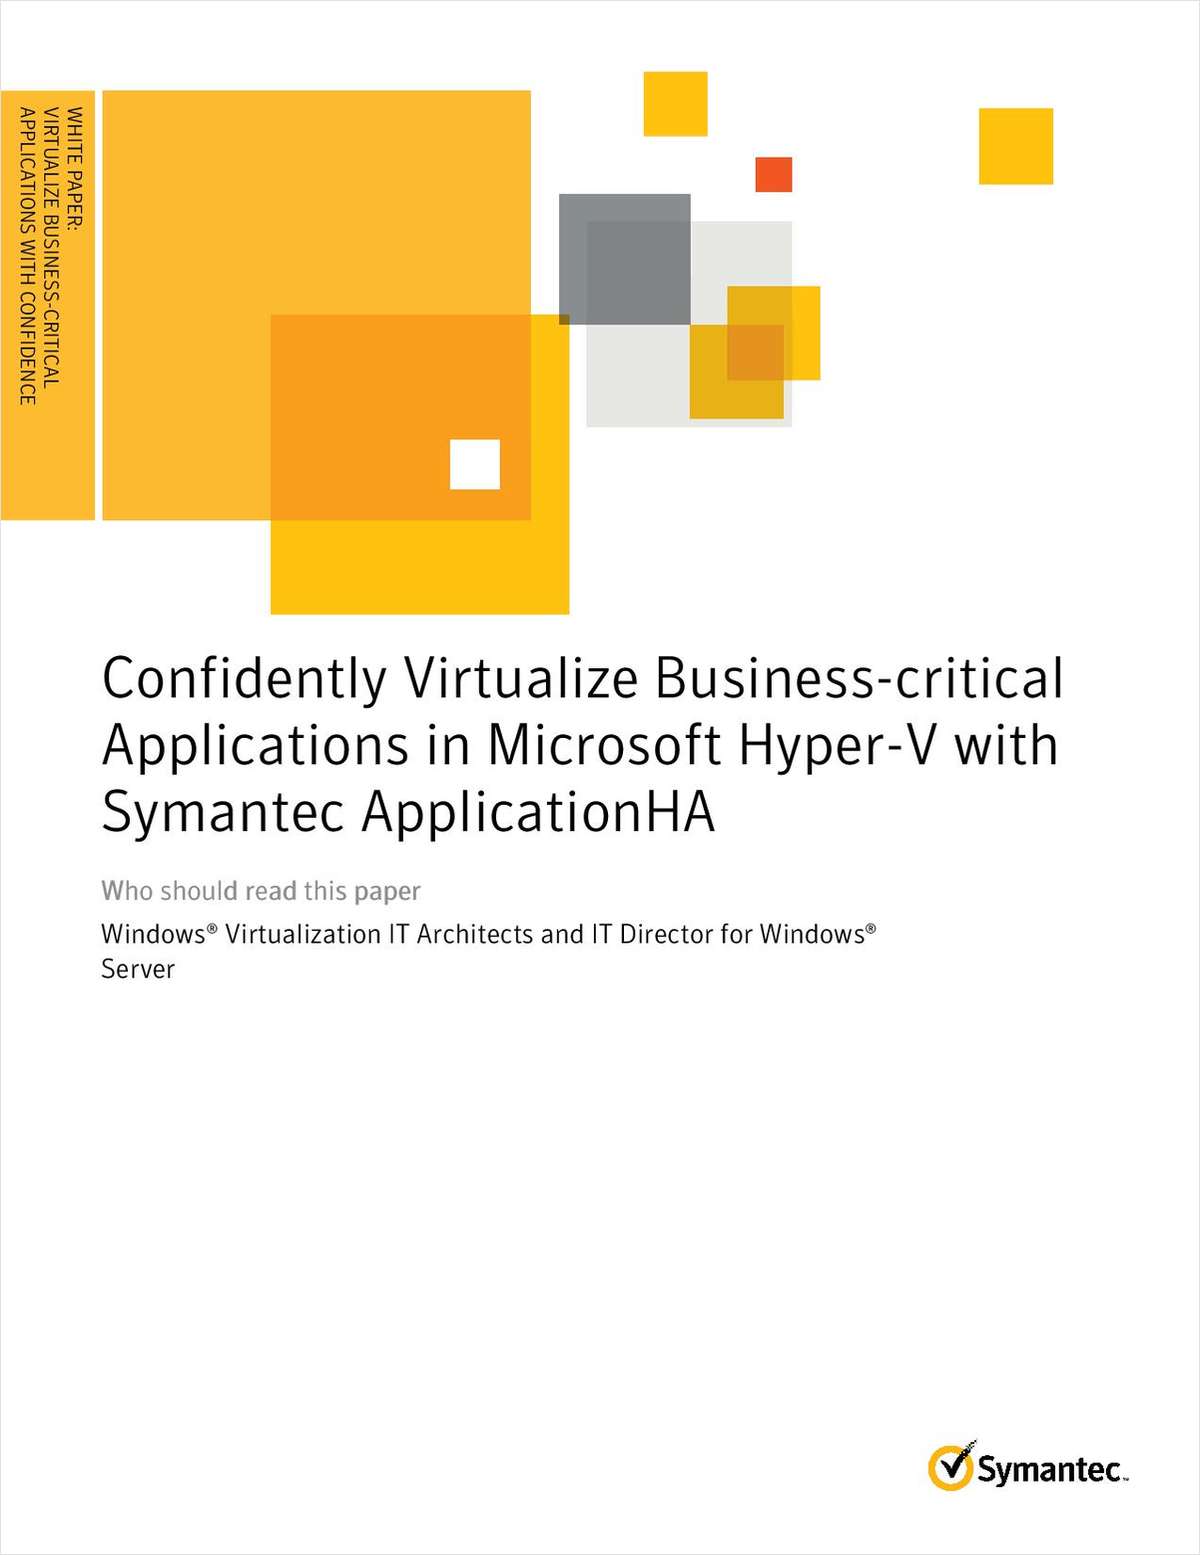 Confidently Virtualize Business-critical Applications in Microsoft Hyper-V with Symantec ApplicationHA